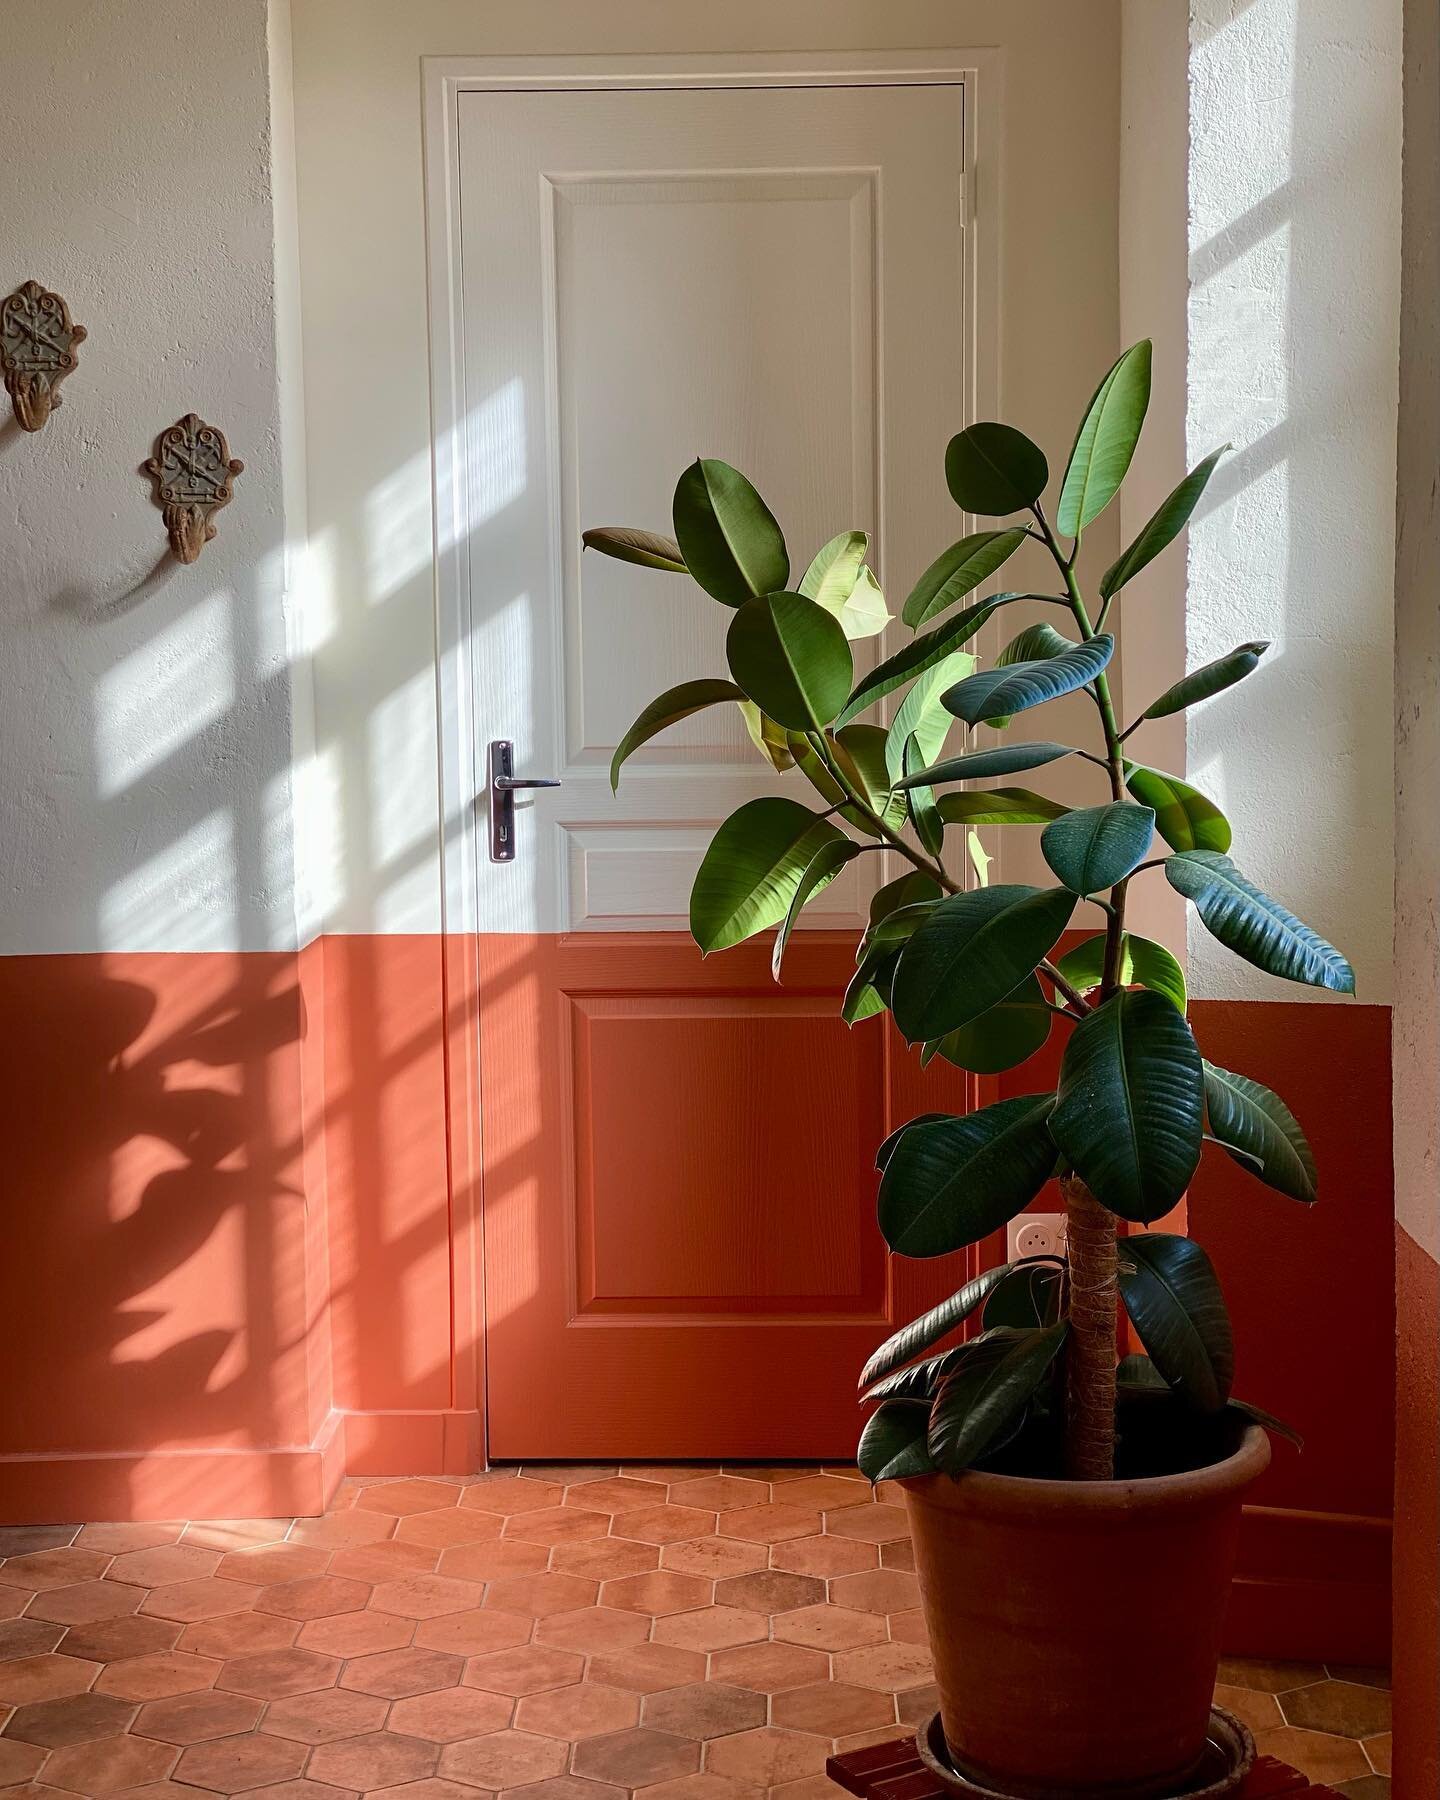 House plant passion 🪴
Silence, &ccedil;a pousse. 
We love to see our plants grow happily in the sunny rooms of Le Prieur&eacute;. 
Generally speaking, the presence of plants gives life to places and the fact of growing vegetation is indicator of a p